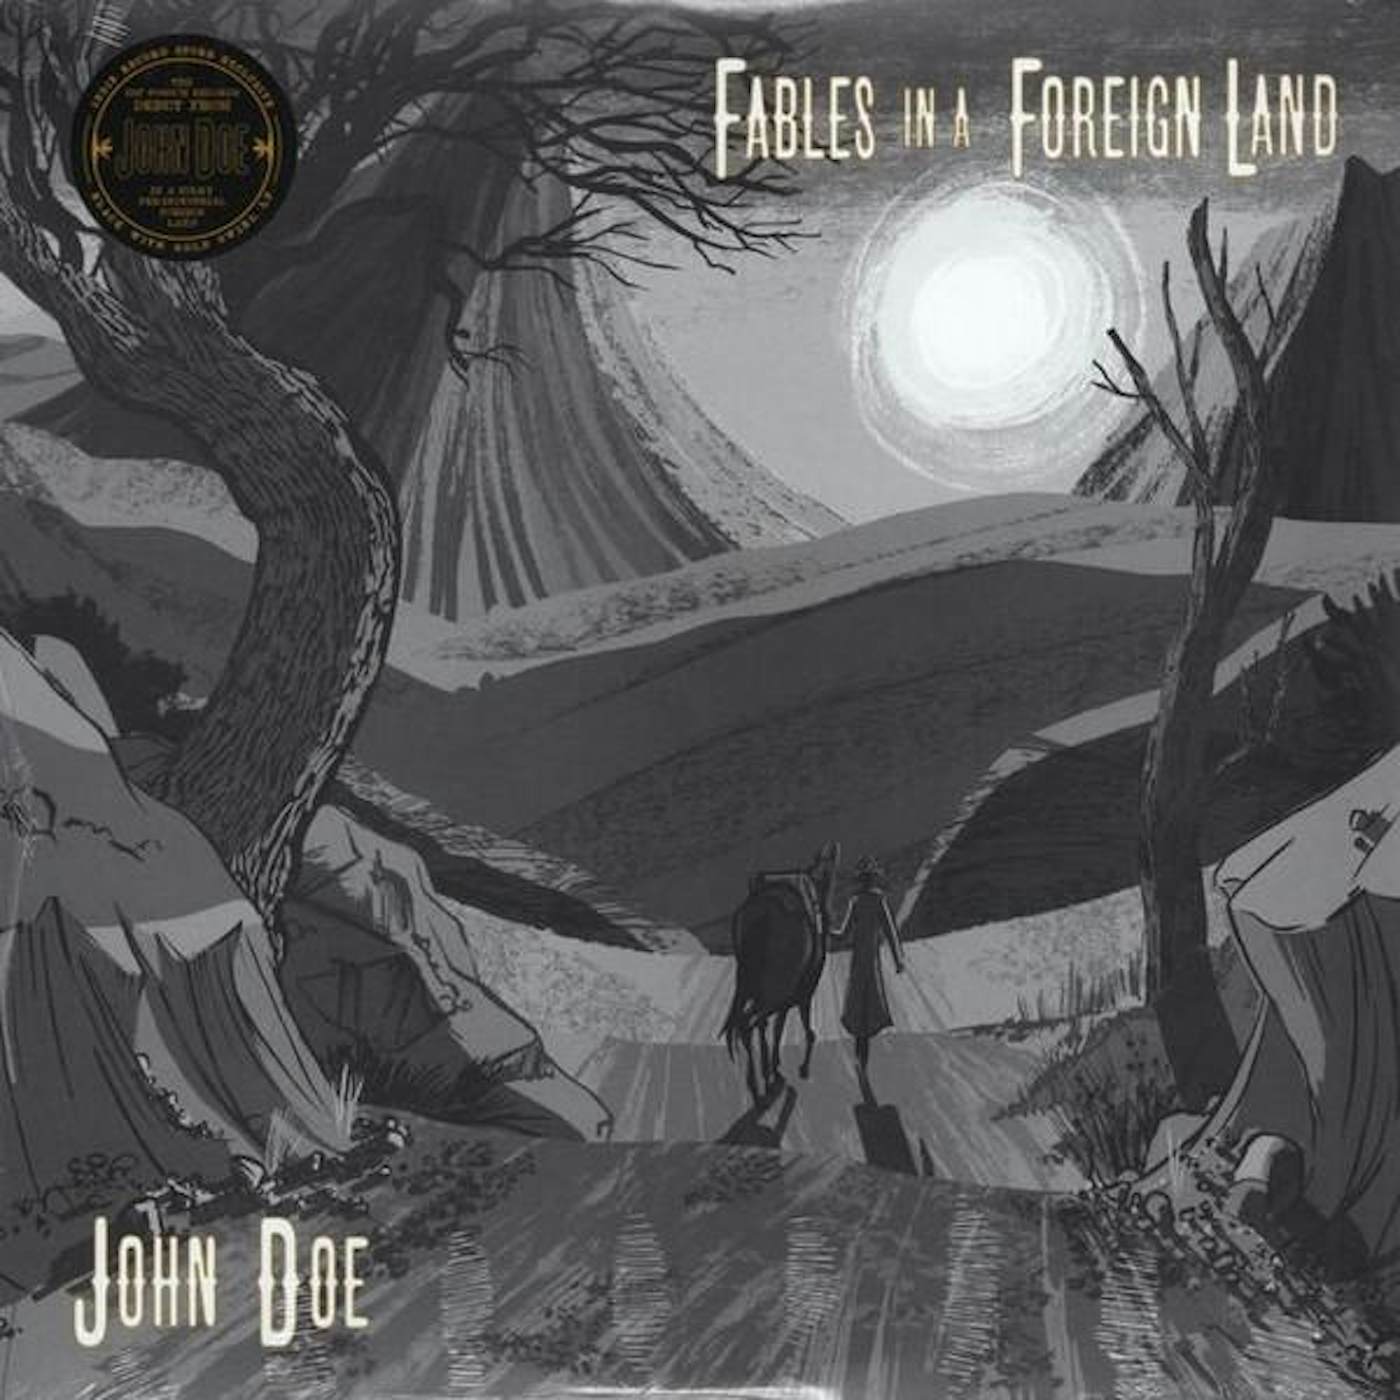 John Doe FABLES IN A FOREIGN LAND (BLACK WITH GOLD SWIRL VINYL) (I) Vinyl Record